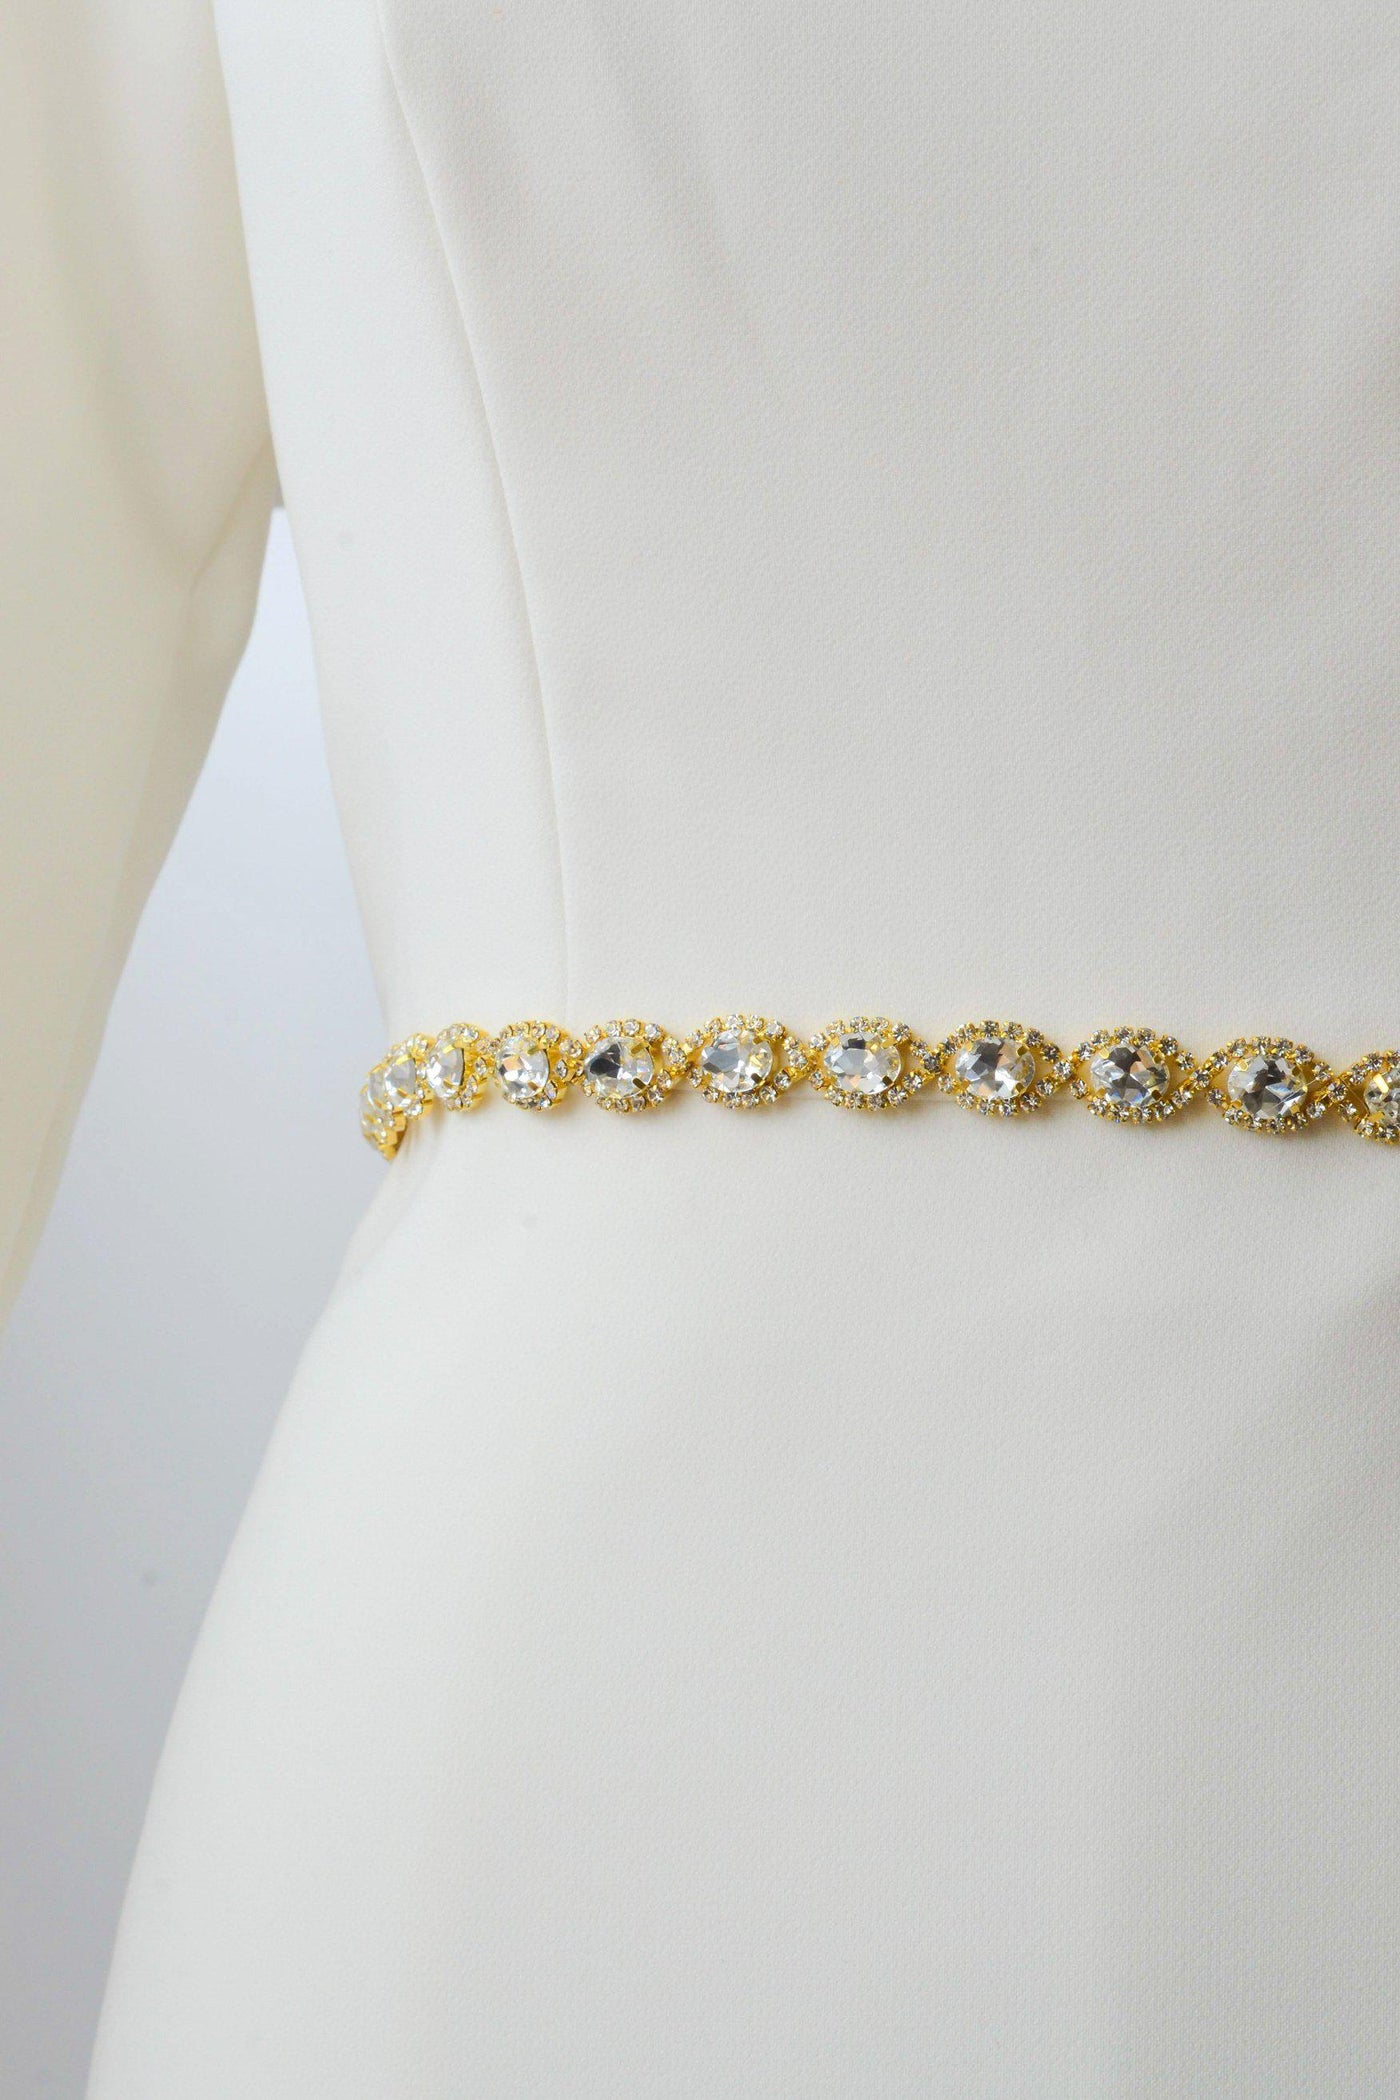 Gold metal belt accented with crystals from bridal shop in Salt Lake City Utah